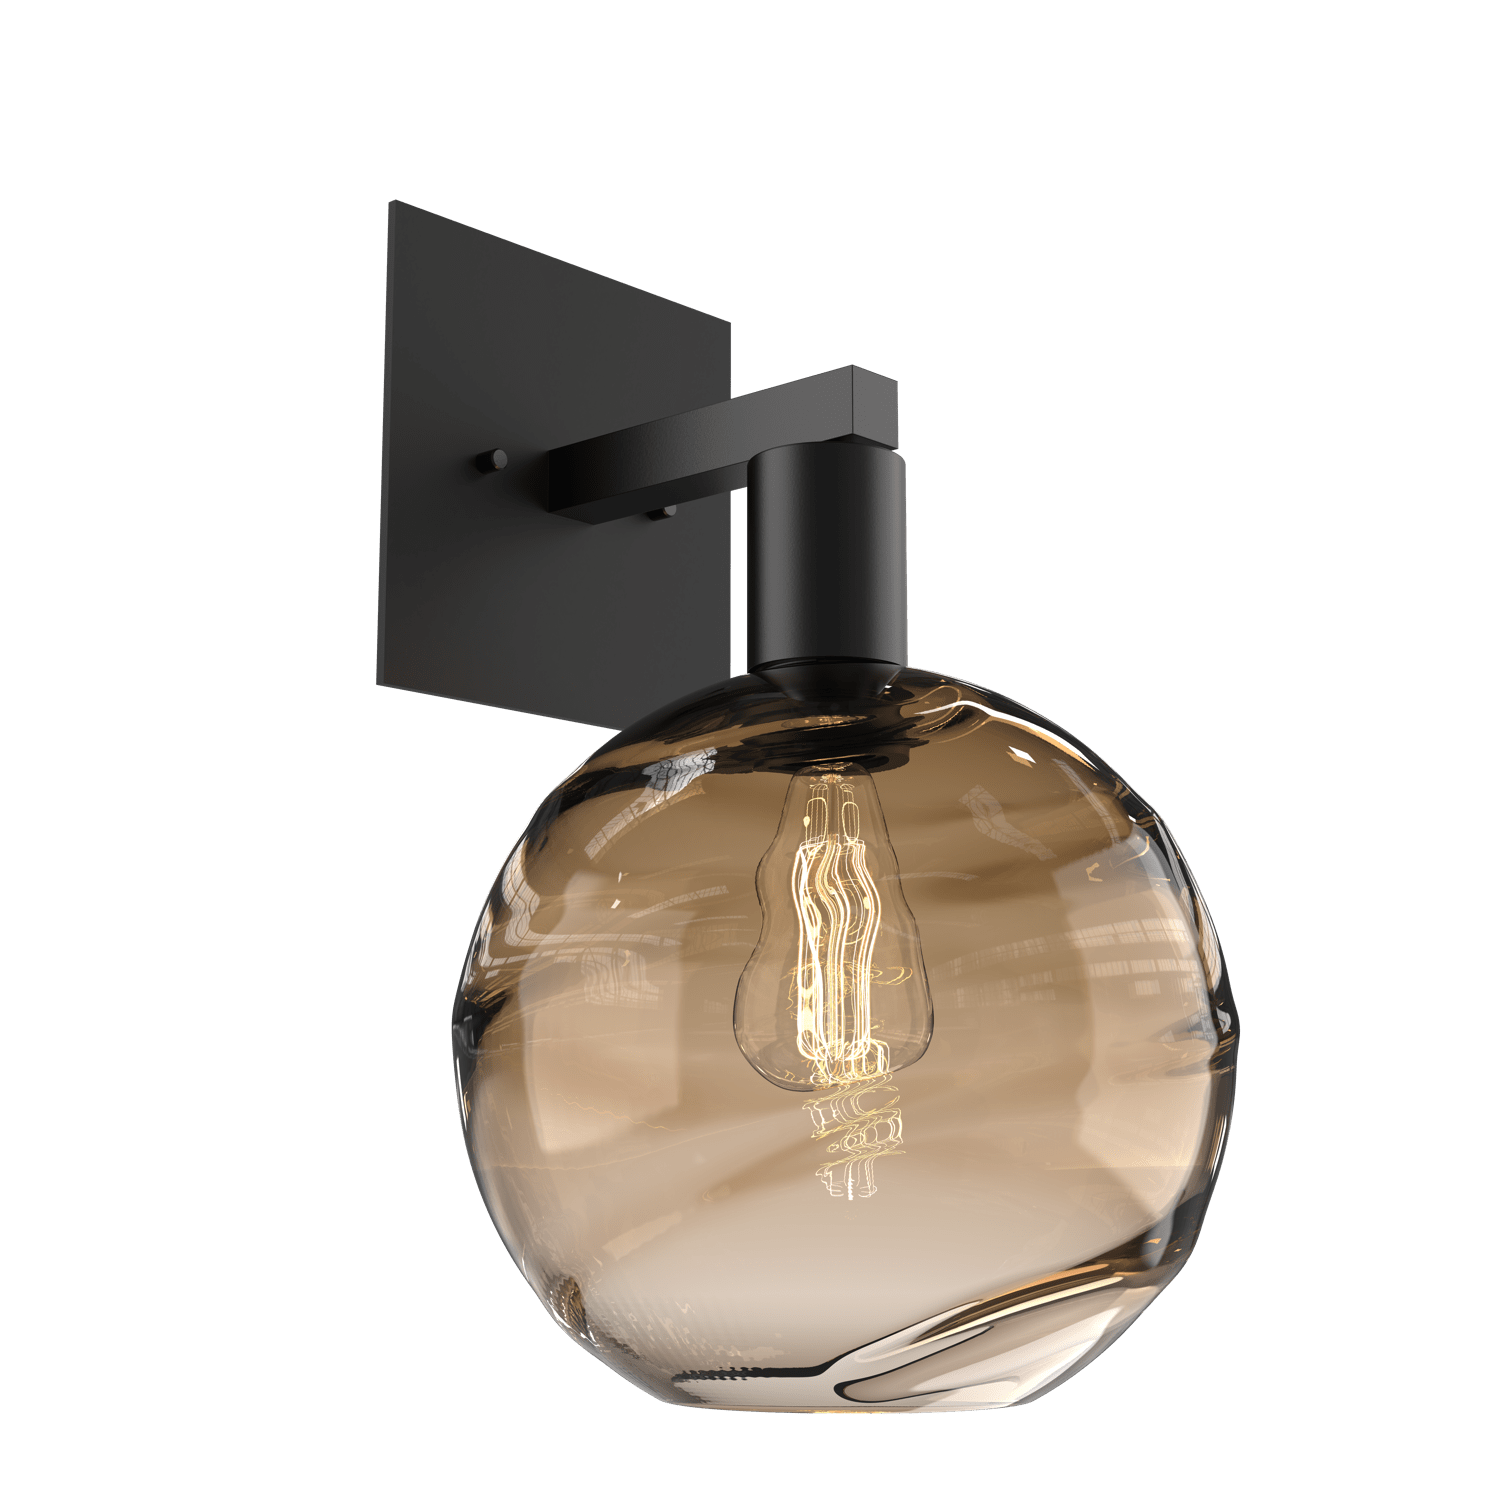 IDB0047-14-MB-OB-Hammerton-Studio-Optic-Blown-Glass-Terra-wall-sconce-with-matte-black-finish-and-optic-bronze-blown-glass-shades-and-incandescent-lamping